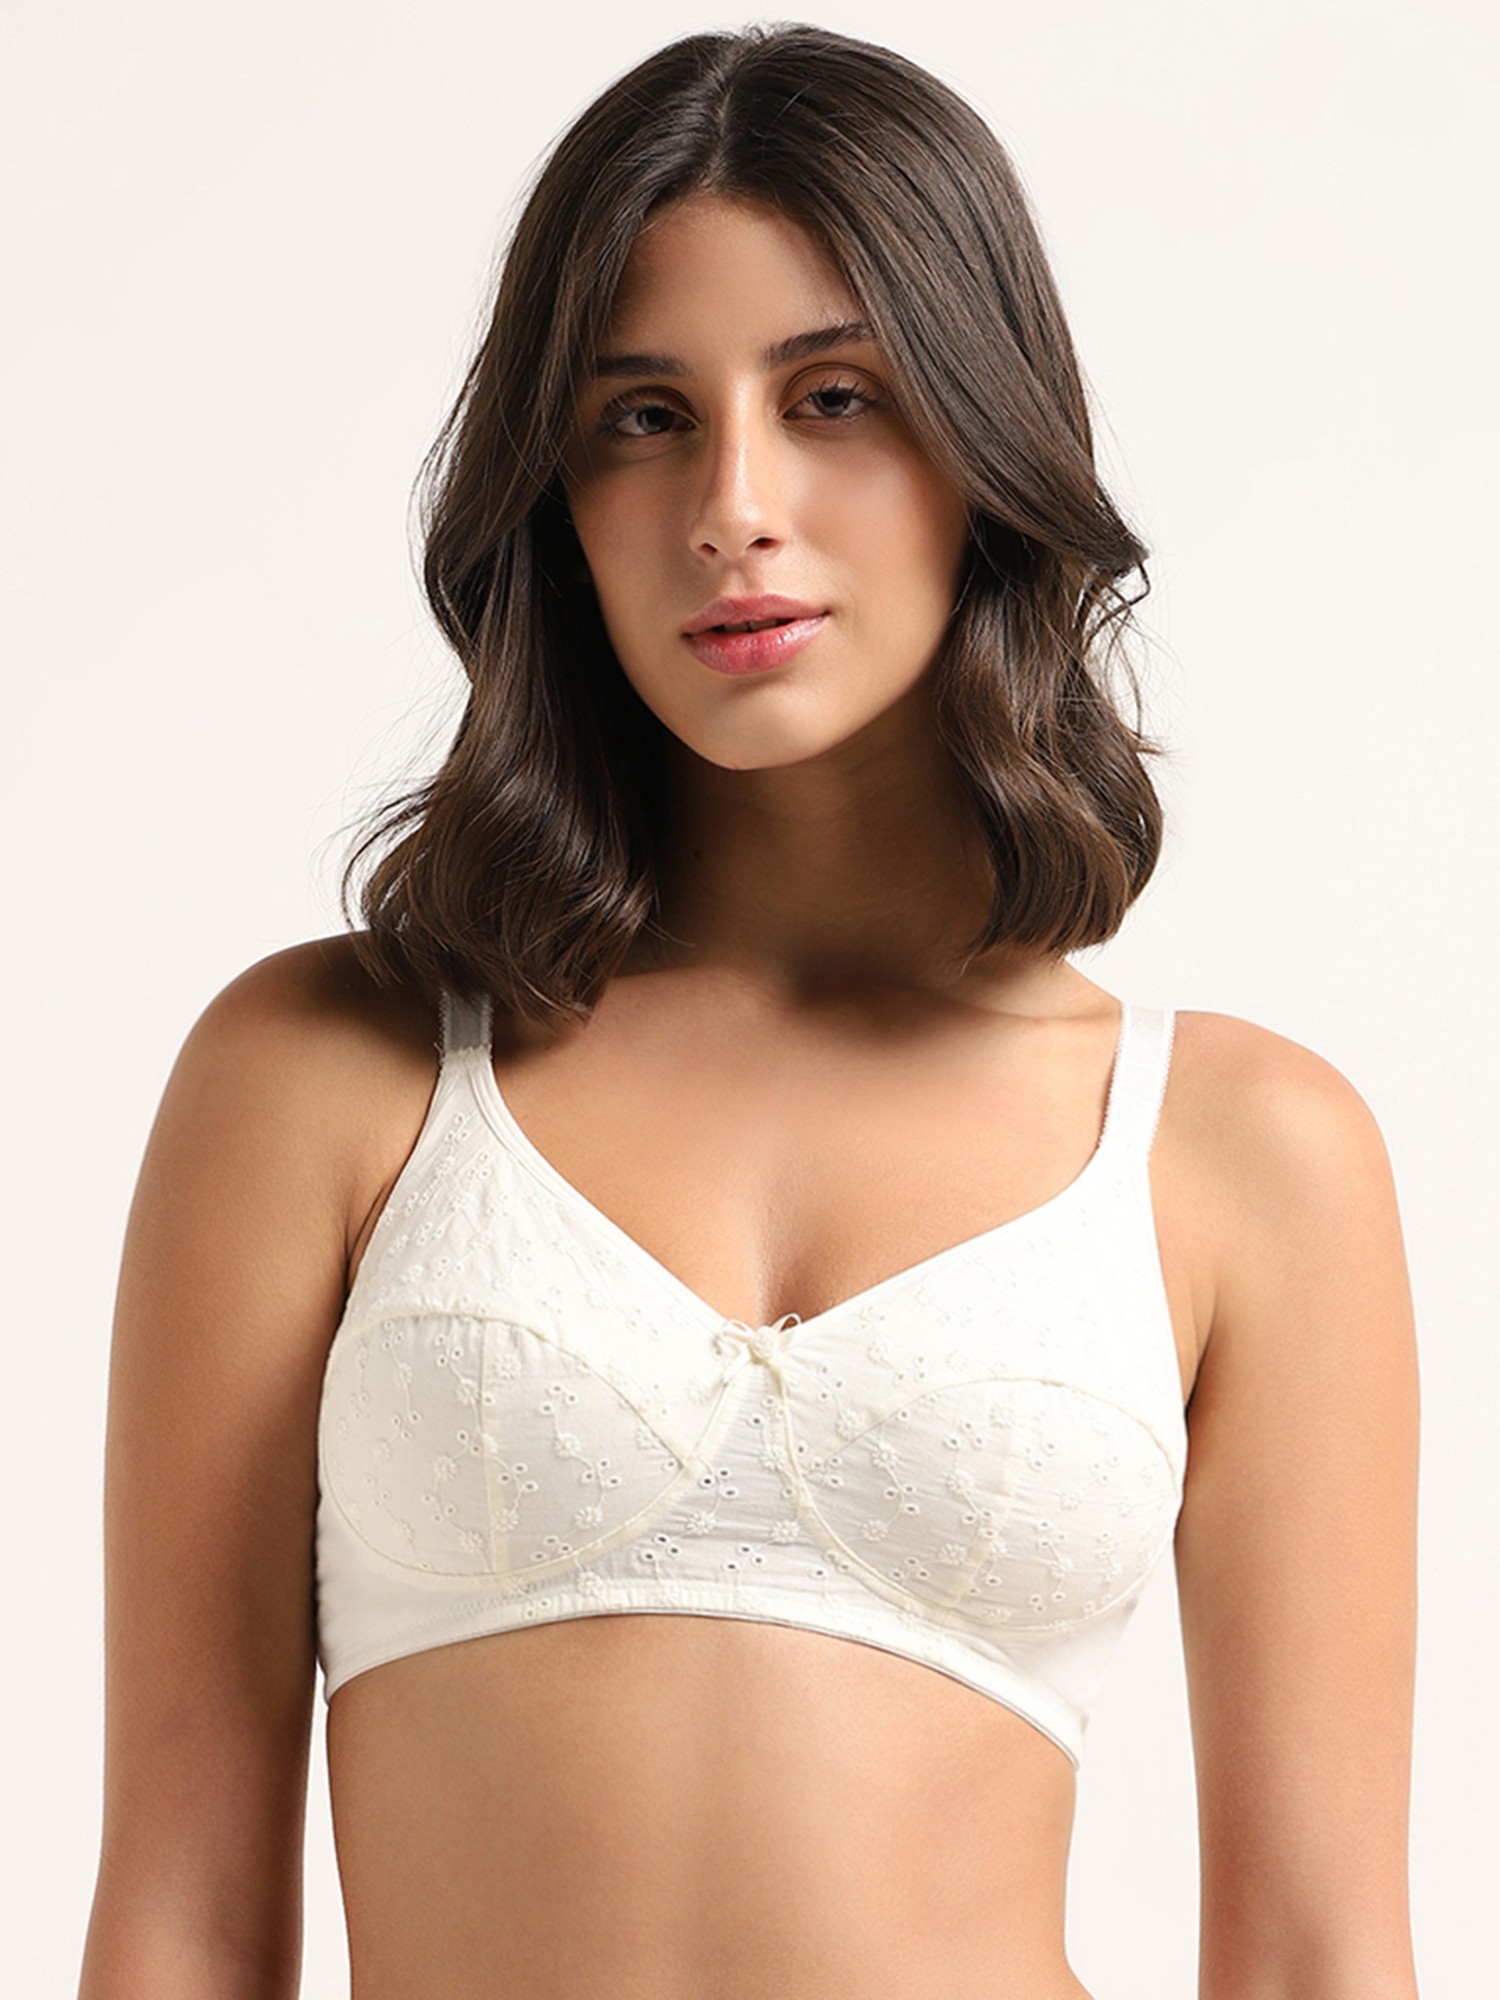 Westside - Introducing The Lounge Bra by Wunderlove – the perfect